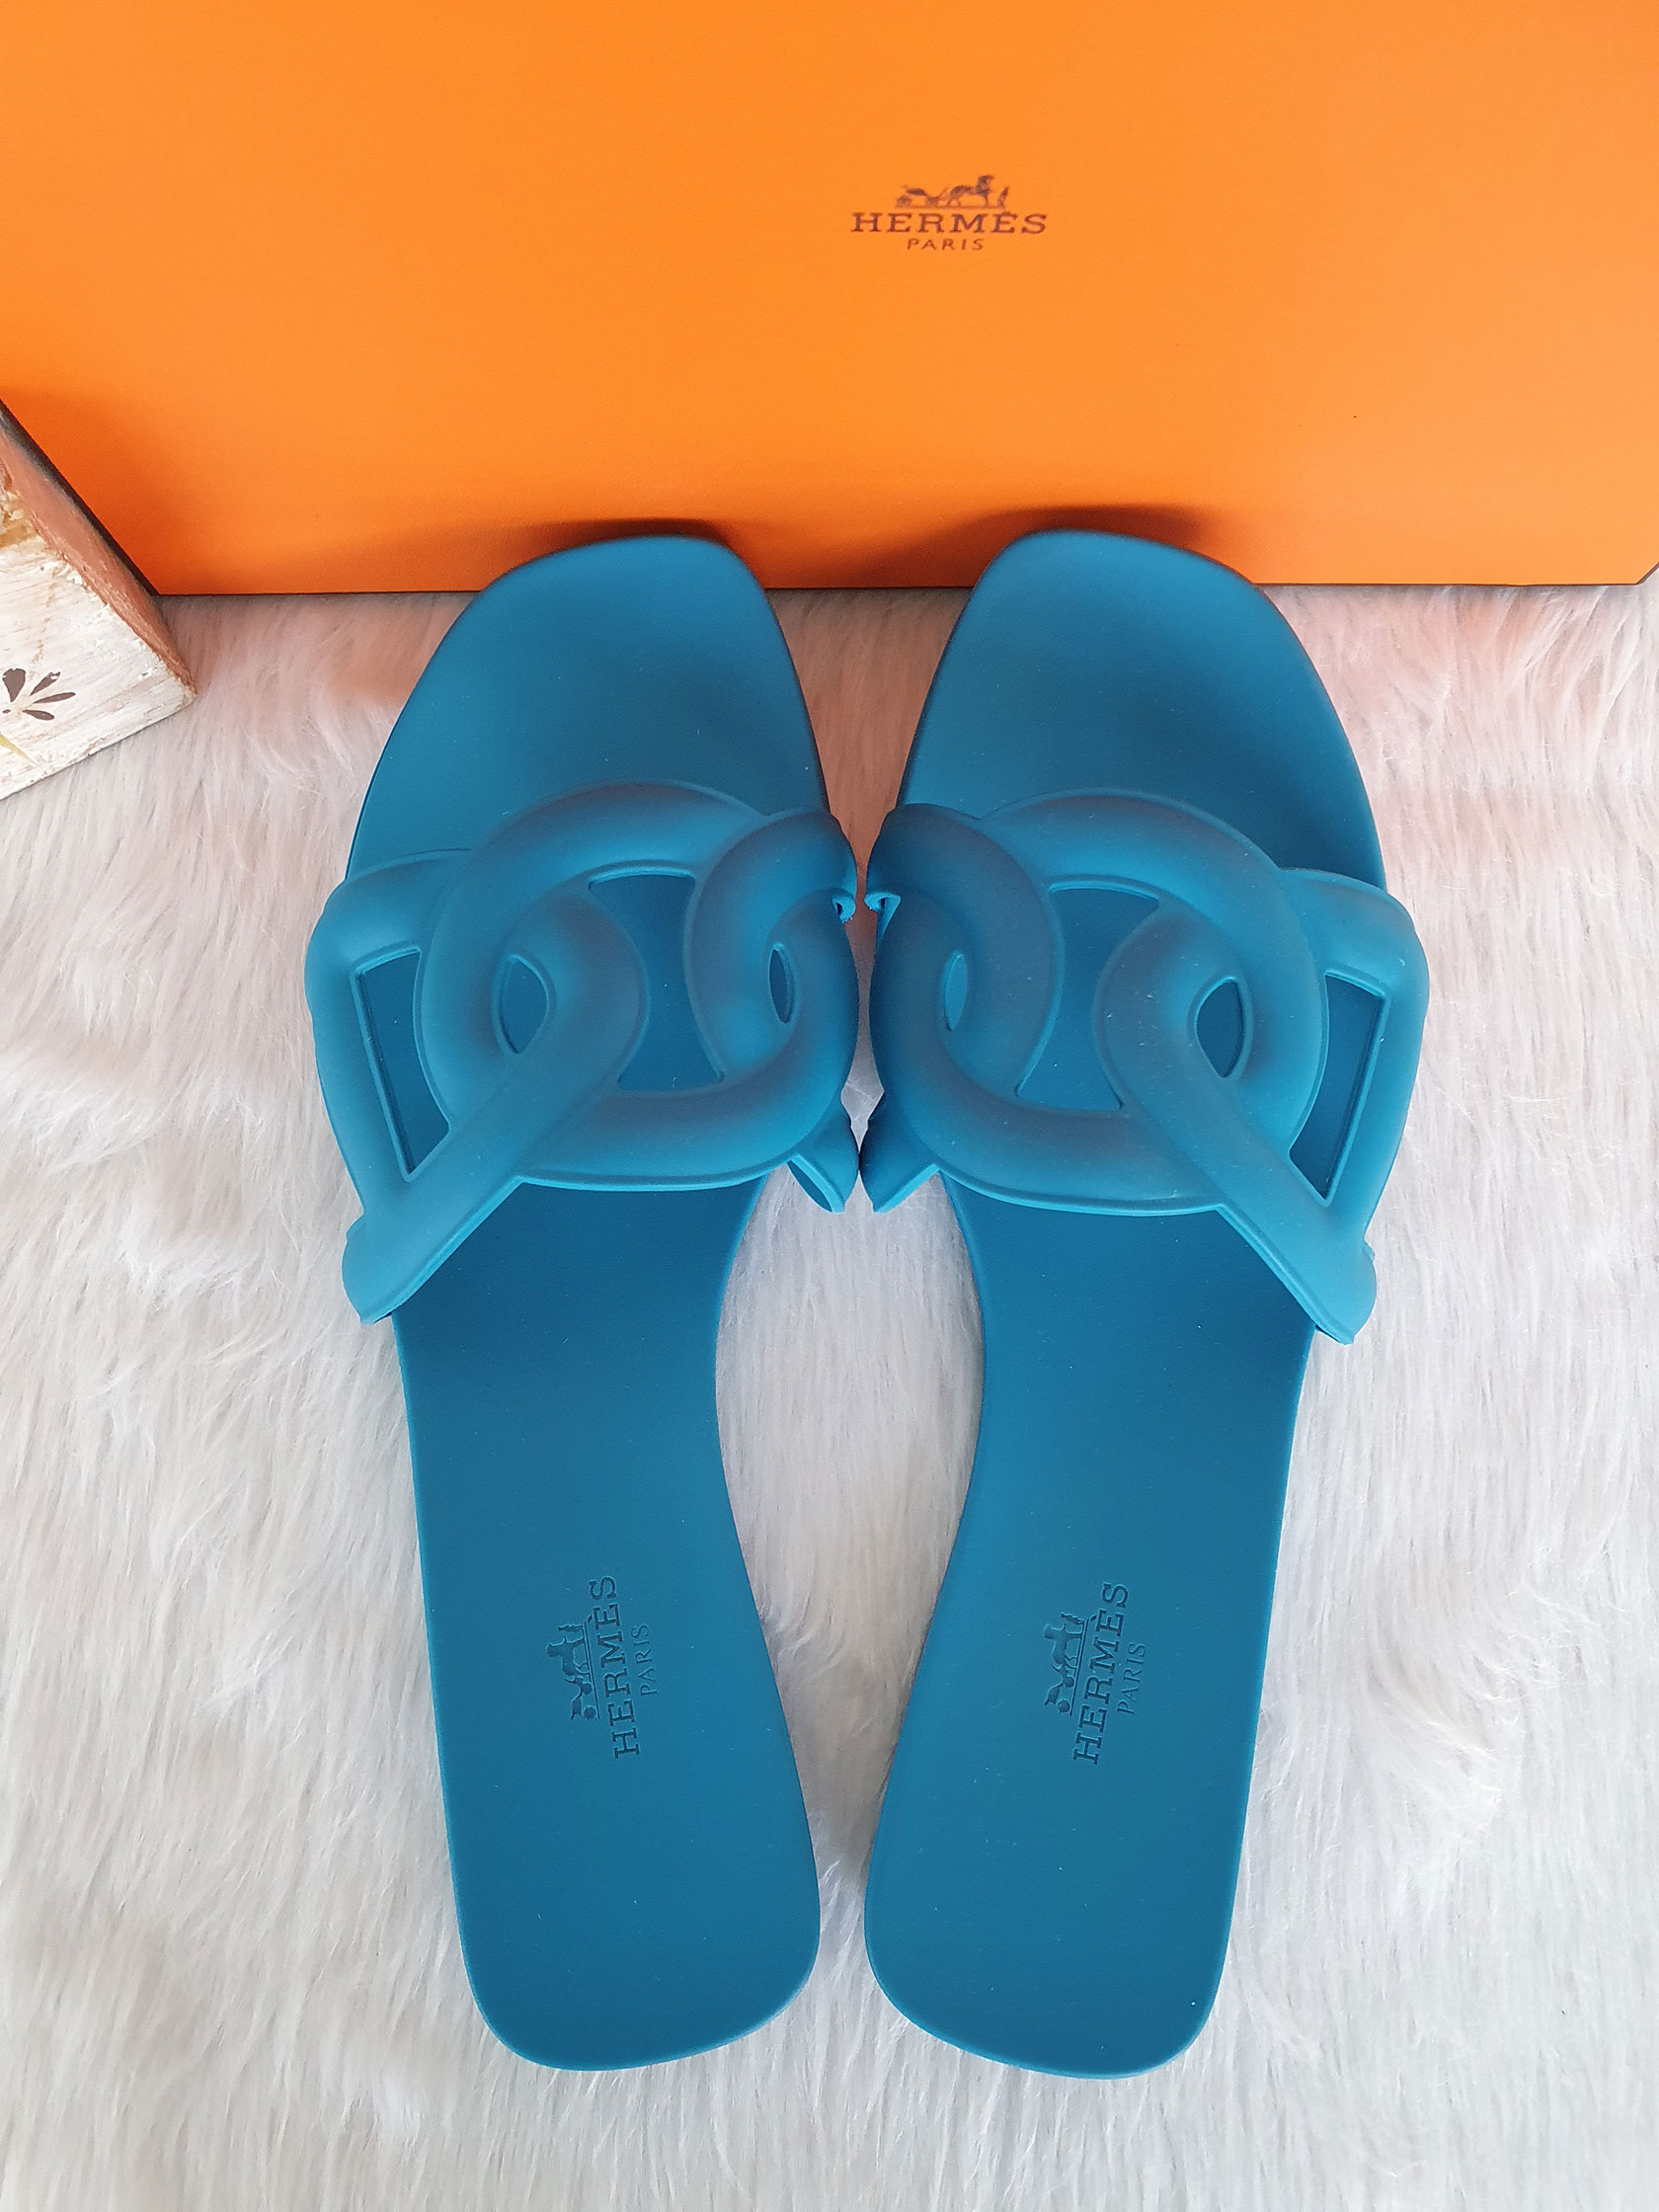 Hermes Rivage Sandals | Mommy Micah 